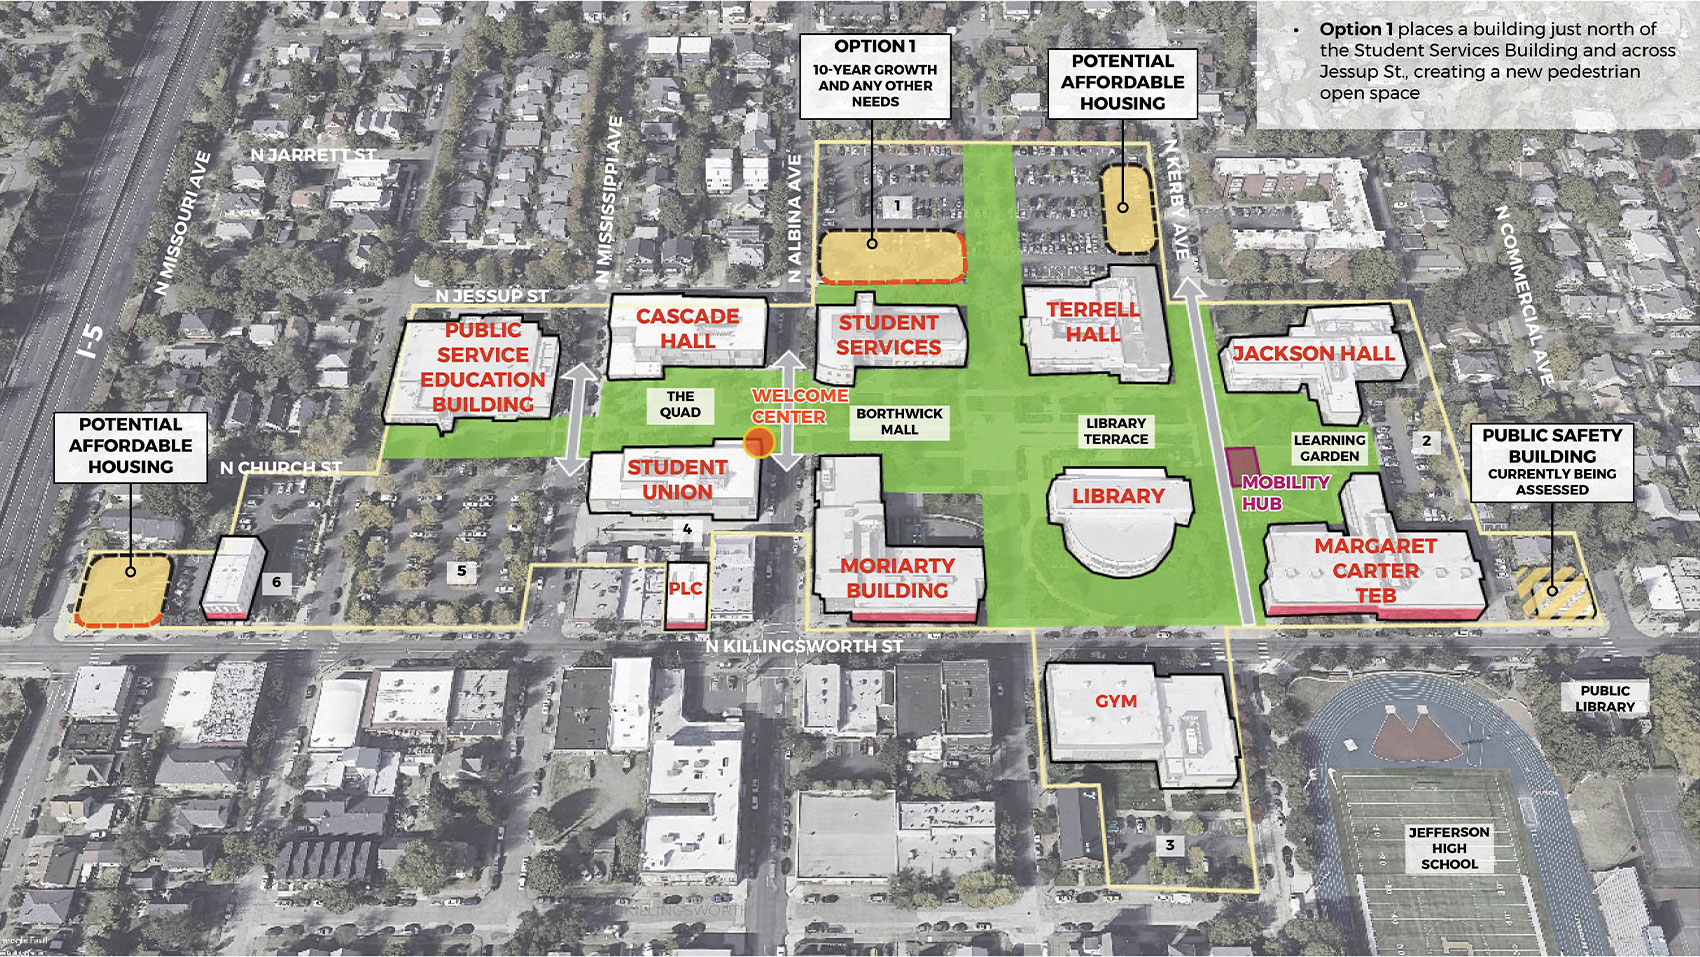 Option 1|The same aerial photograph view as shown in the Campus Planning Concept image. Three areas of the campus have an orange fill with a dashed black outline, indicating future development areas. At the top right of the image, a white box contains text reading: “Option one places a building just north of the Student Services Building and across Jessup Street, creating a new pedestrian open space.” An orange area about the same size as the existing Student Services Building is shown north of that building parallel to Jessup Street on the northern parking lot. It has a bright red dashed edge facing Jessup Street and along the north-south green area that connects to the neighborhood at the north. Its other edges are black. It is labeled “Option 1: 10-year growth and any other needs”. A second orange area is shown parallel to Kerby Avenue on the eastern edge of the northern parking lot. It is labeled, “Potential Affordable Housing”. A third orange area is shown on PCC’s parking lot seven, on the northeast corner of Killingsworth Street and Missouri Avenue. It is also labeled “Potential Affordable Housing”. It has a bright red dashed edge along Killingsworth Street. The existing Public Safety building on the northwest corner of Commercial Avenue and Killingsworth Street has light orange stripes over it, labeled, “Public Safety Building currently being assessed”. The Student Union building has an orange dot on its northeast corner on Albina Avenue labeled “Welcome Center”. A purple rectangle along the east side of Kerby Avenue between Jackson Hall and the Margaret Carter TEB is labeled “Mobility Hub”.